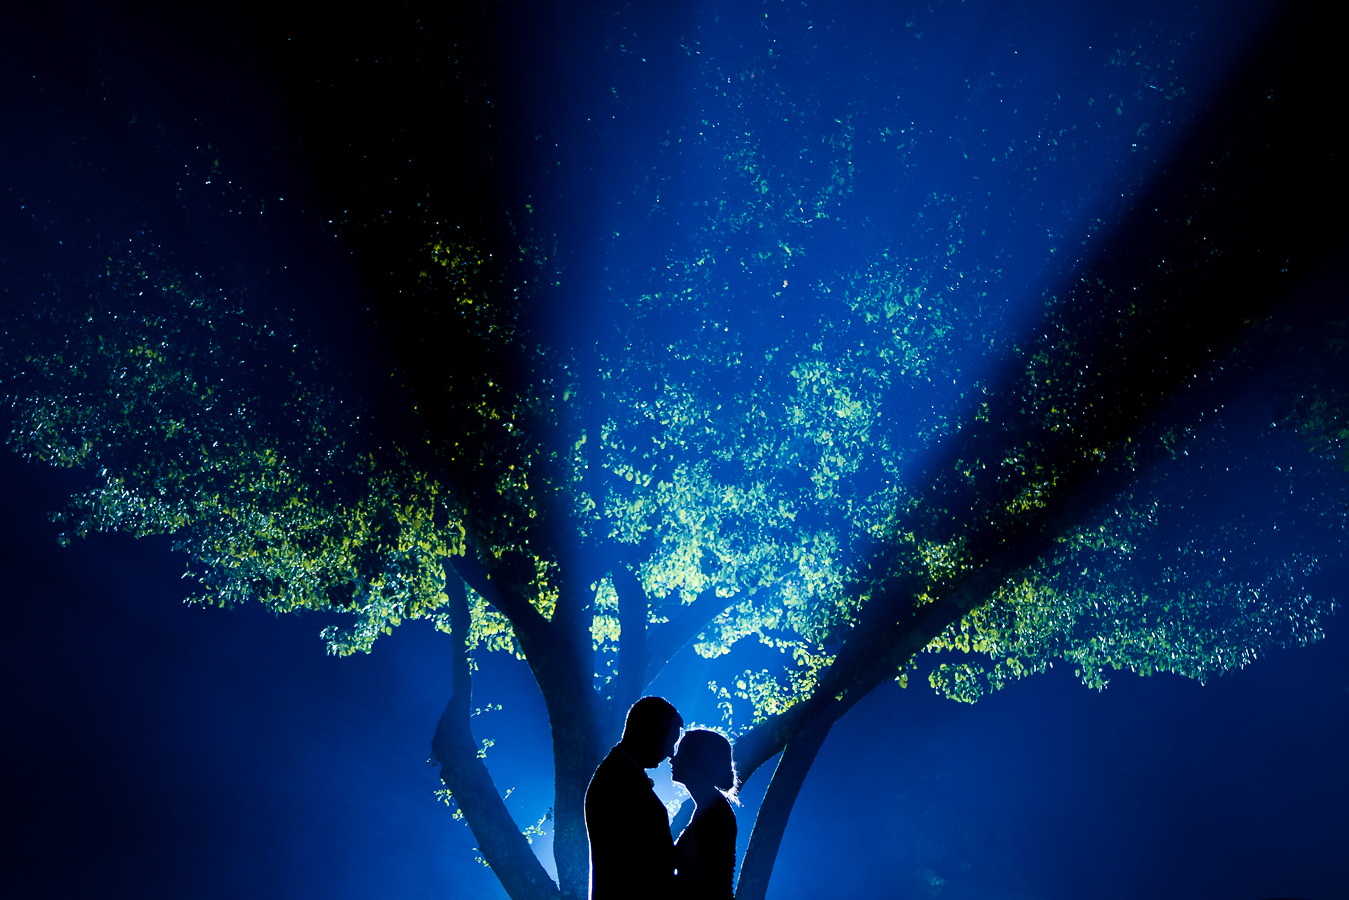 creative nj wedding photographer, lisa rhinehart, captures this unique, creative silhouette image of the bride and groom as they put their heads together while standing in front of the back lit tree for an end of the night shot of this black and gold wedding reception at the palace at somerset park 